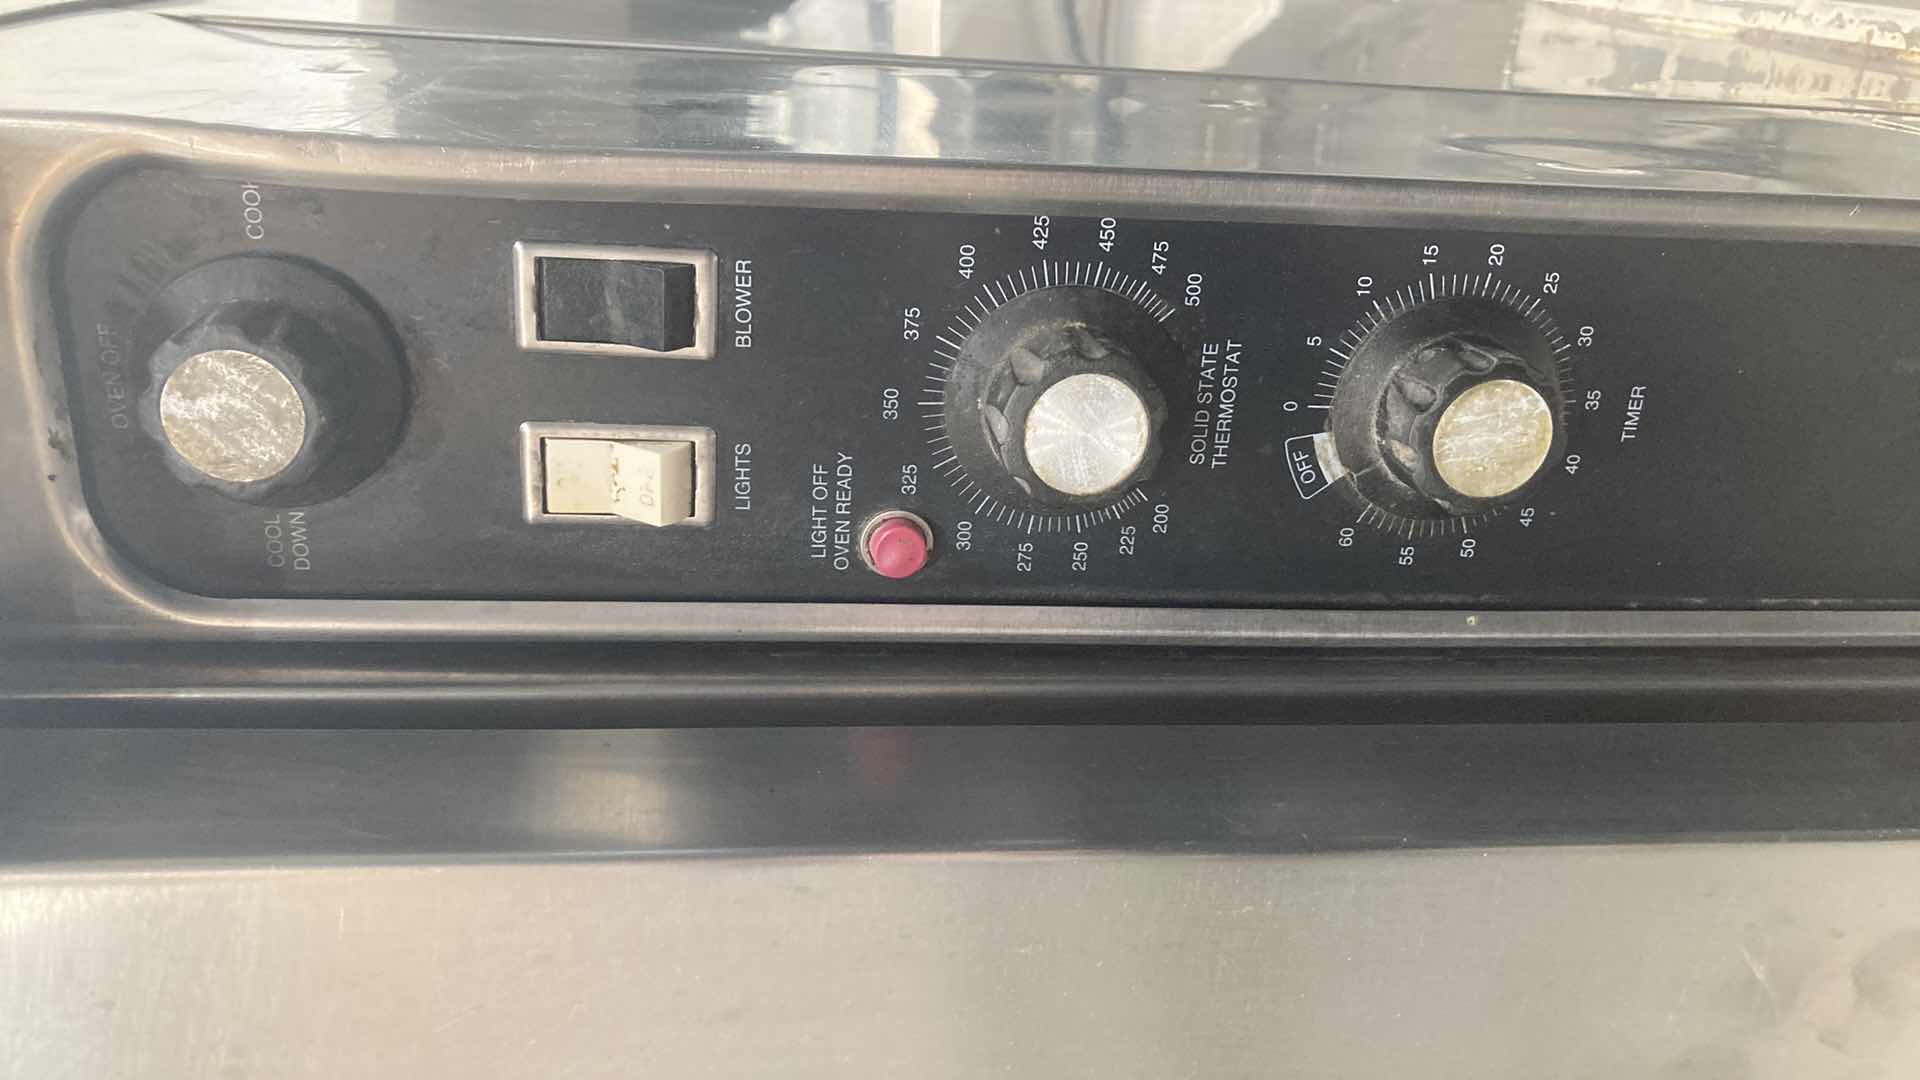 Photo 4 of BLODGETT 2 TIER COMMERCIAL CONVECTION OVEN (ELECTRICAL SHORT)